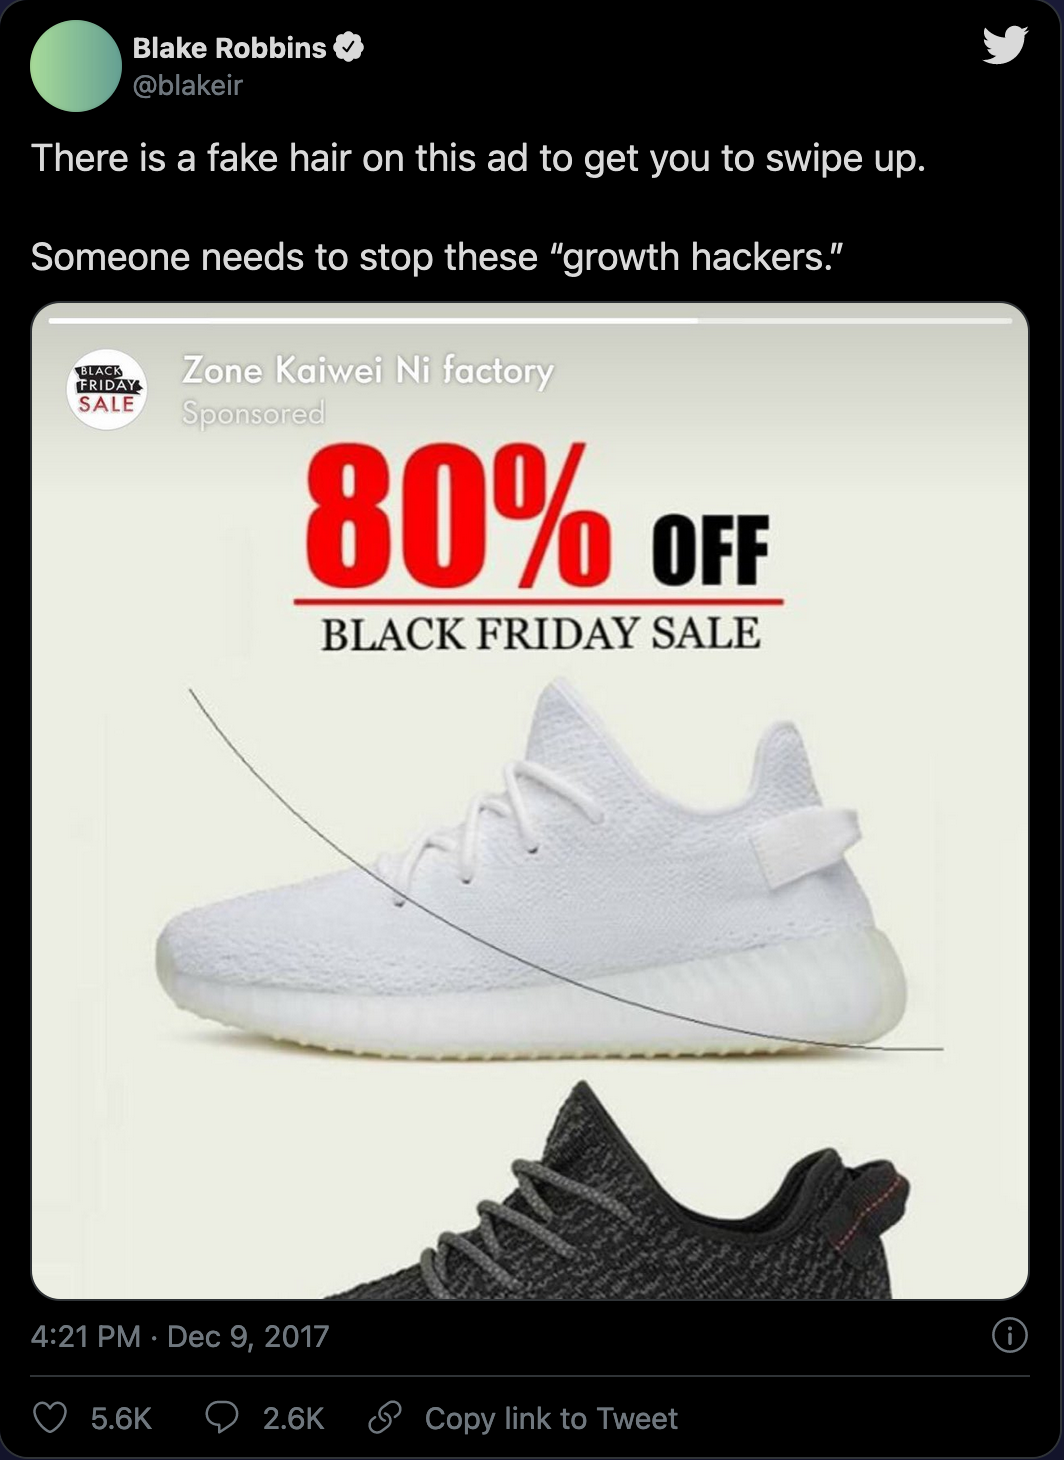 A tweet showing a fake hair photoshopped onto a sneaker advertisement.